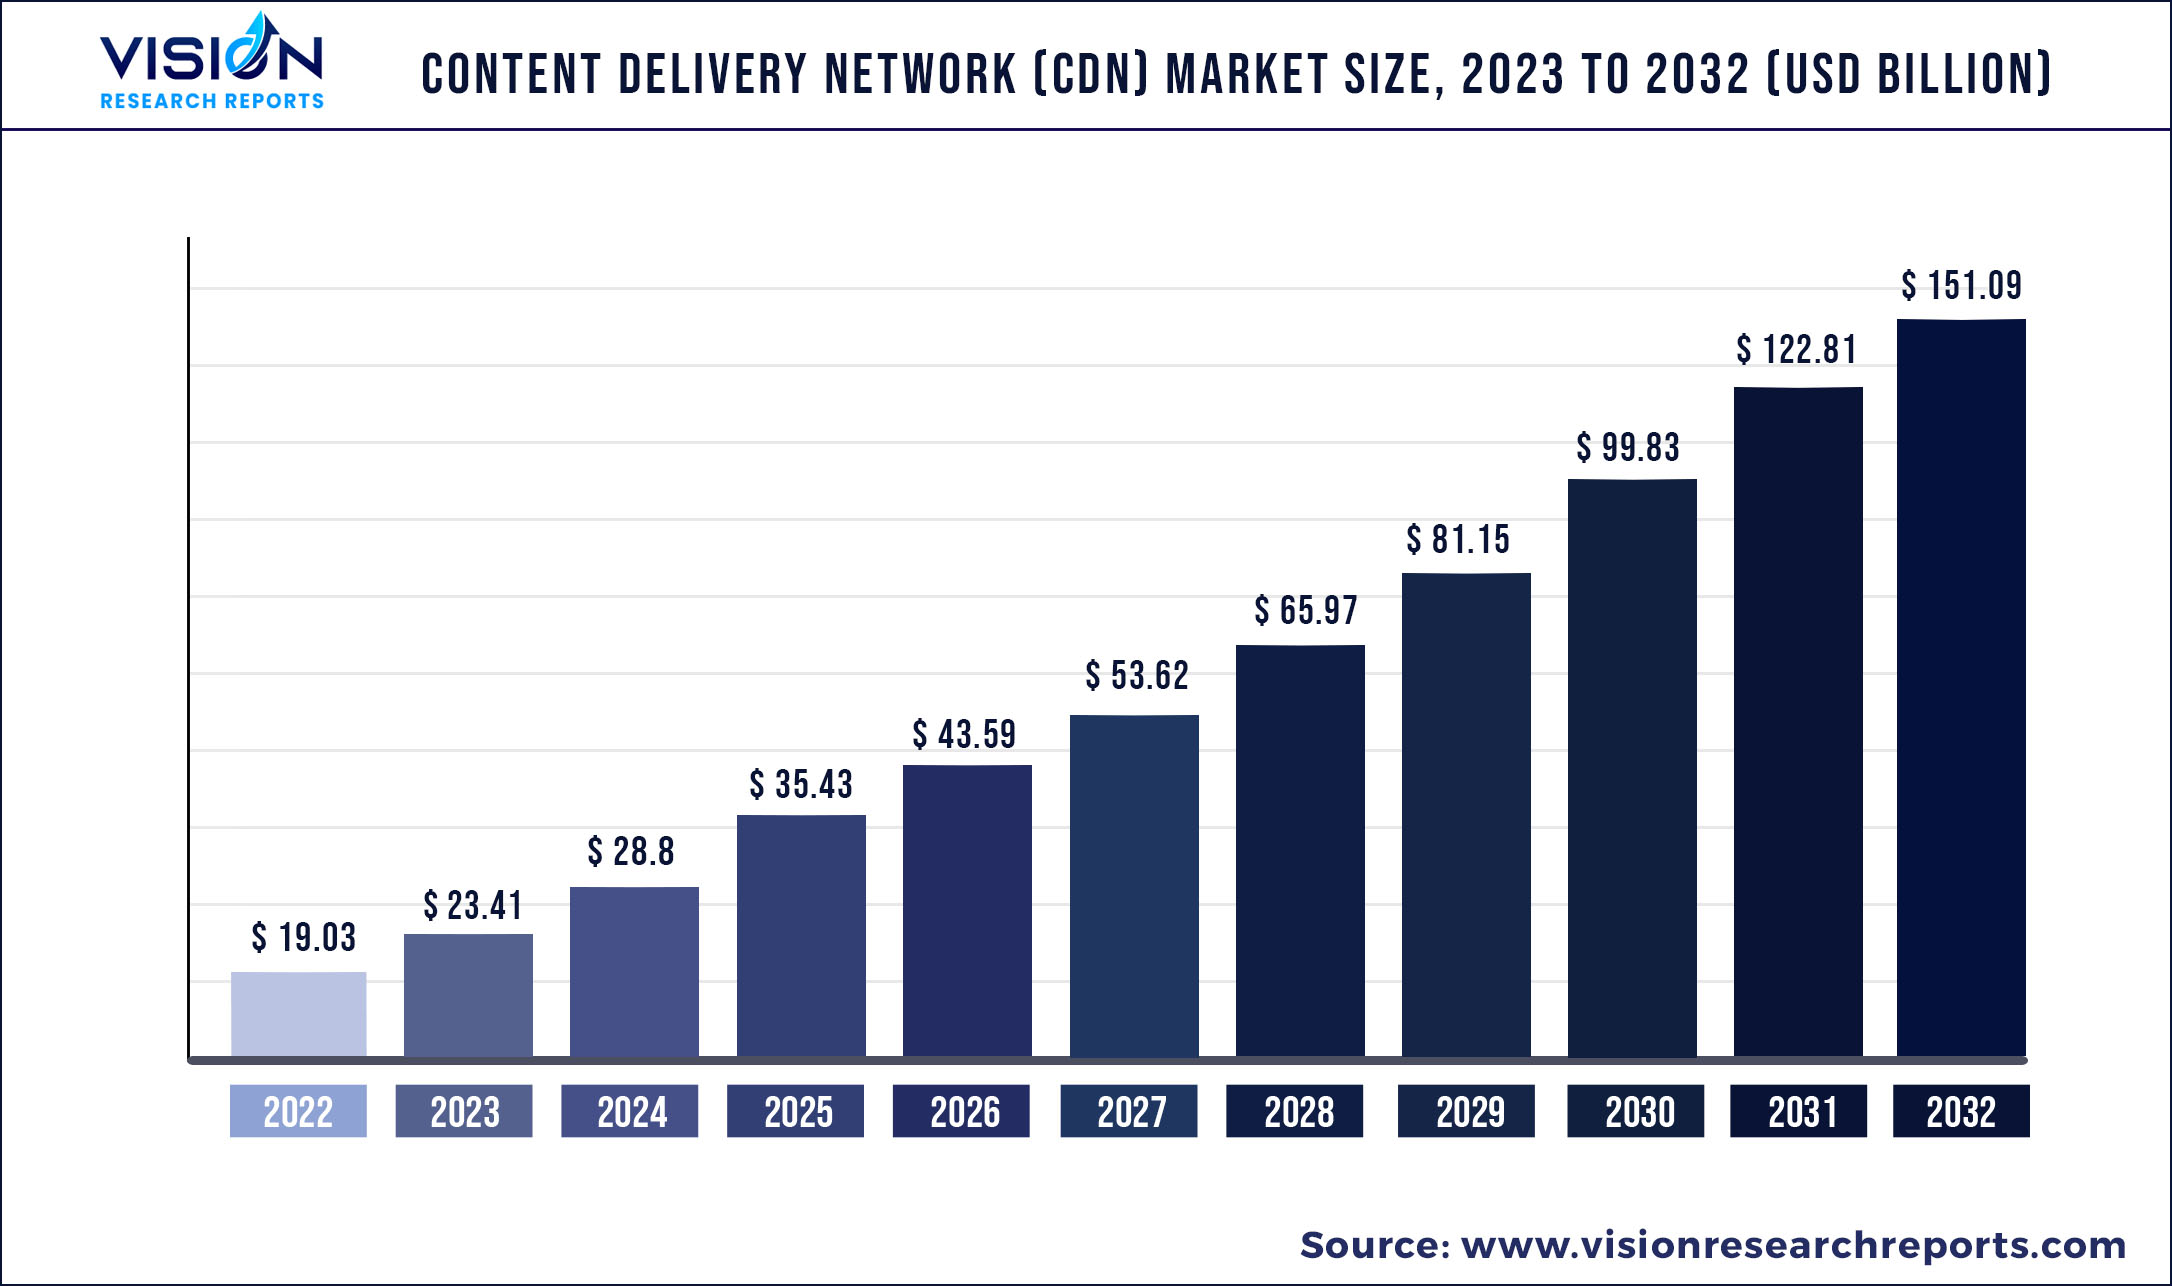 Content Delivery Network Market Size 2023 to 2032